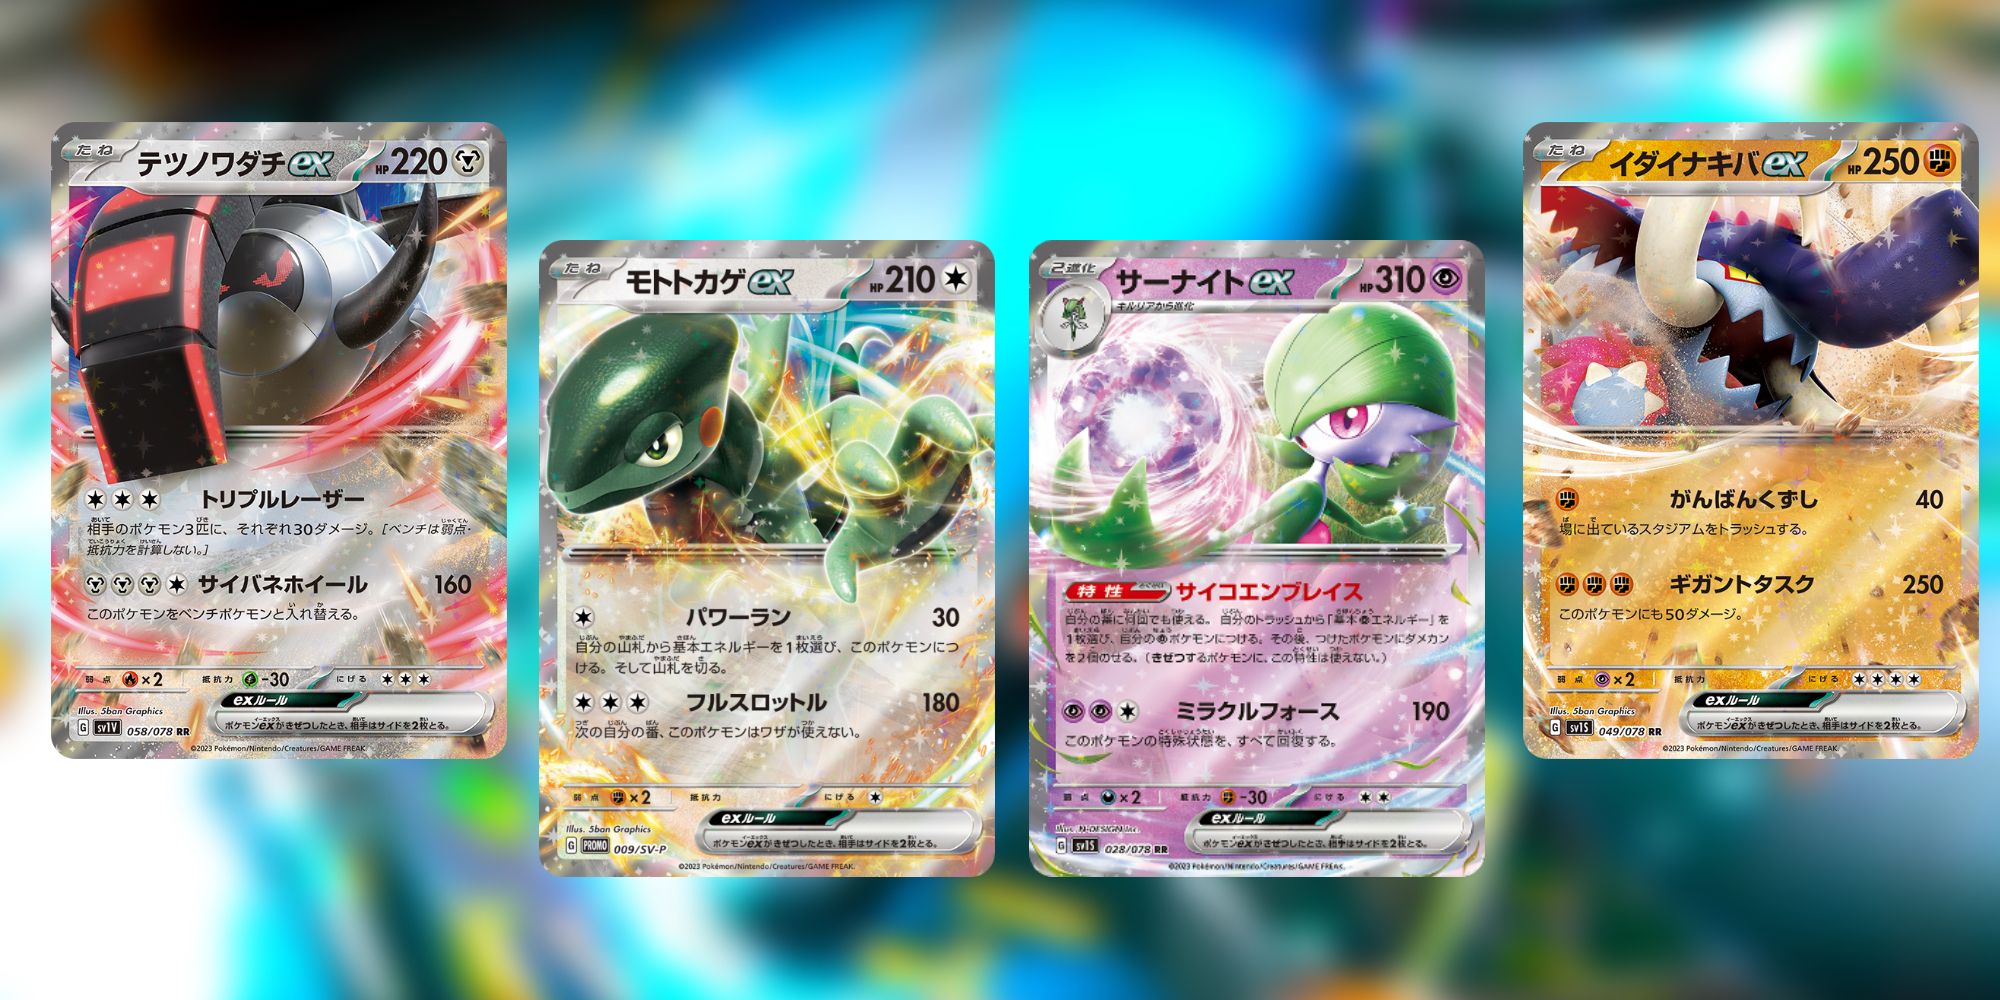 Image of Cyclizar, Gardevoir, Great Tusk, and Iron Treads in their ex forms